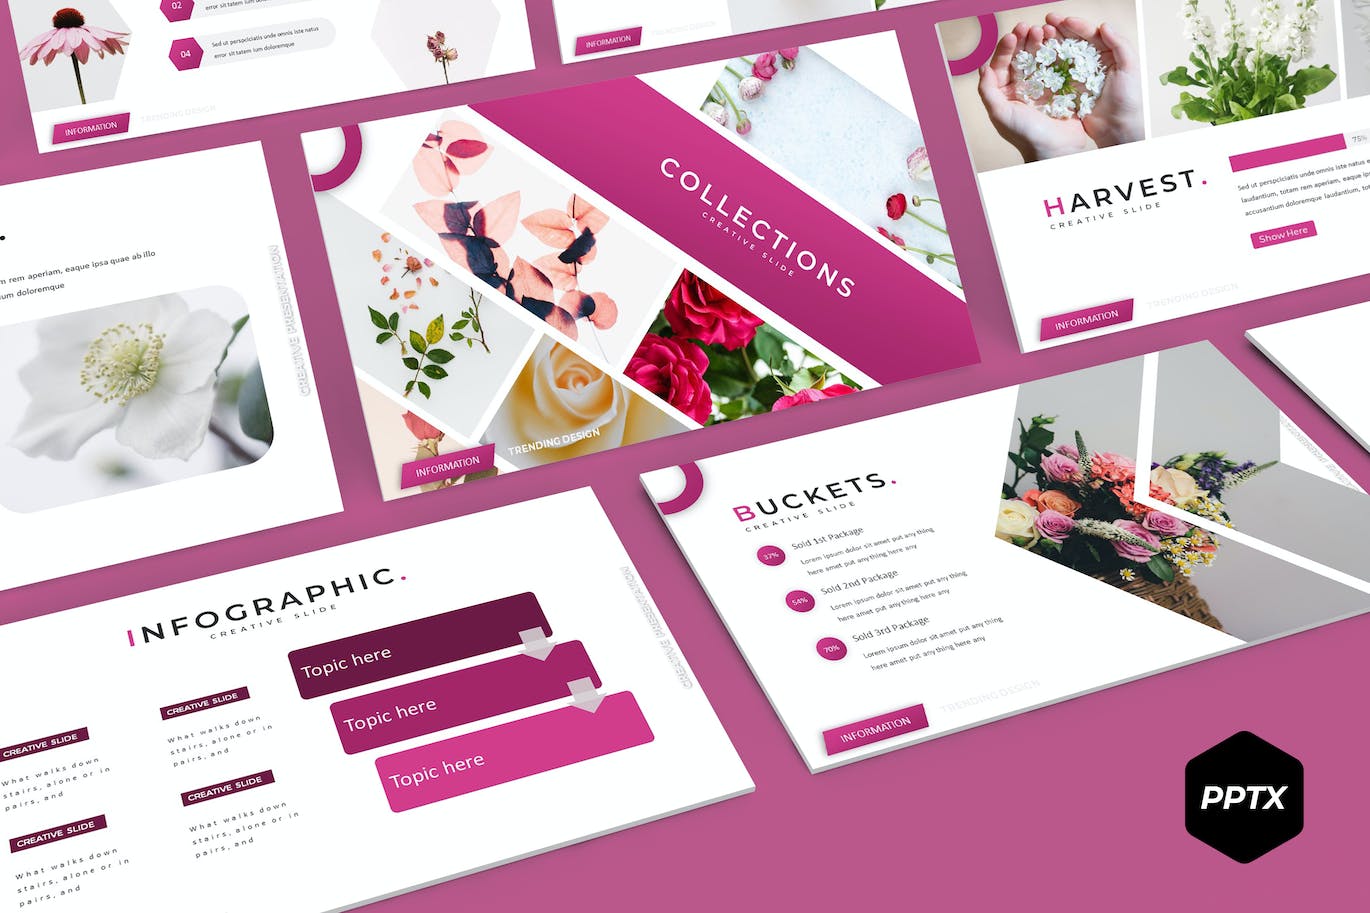 Set of images of wonderful presentation template slides in pink and white colors.